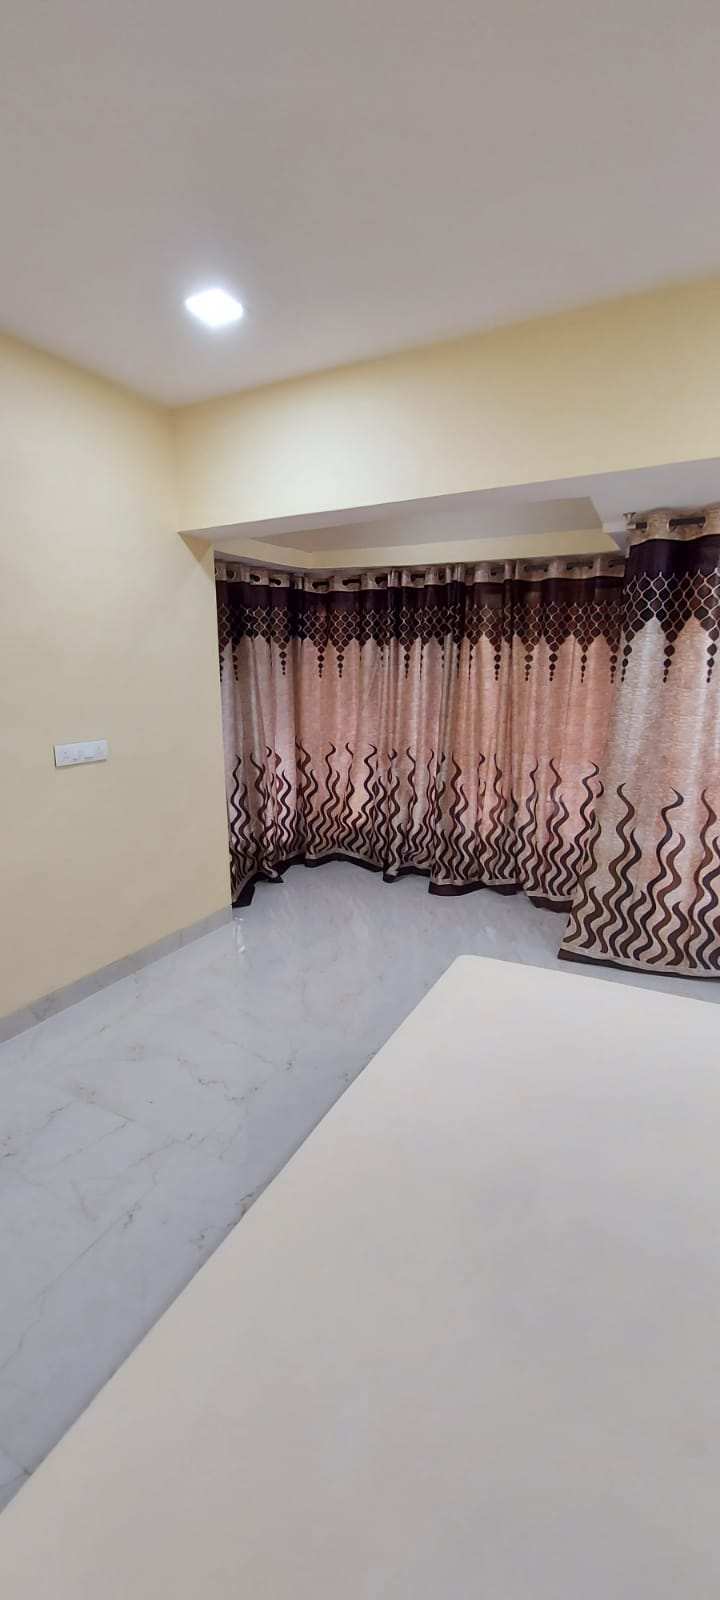 3BHK Apartment available on rent in Lokhandwala.